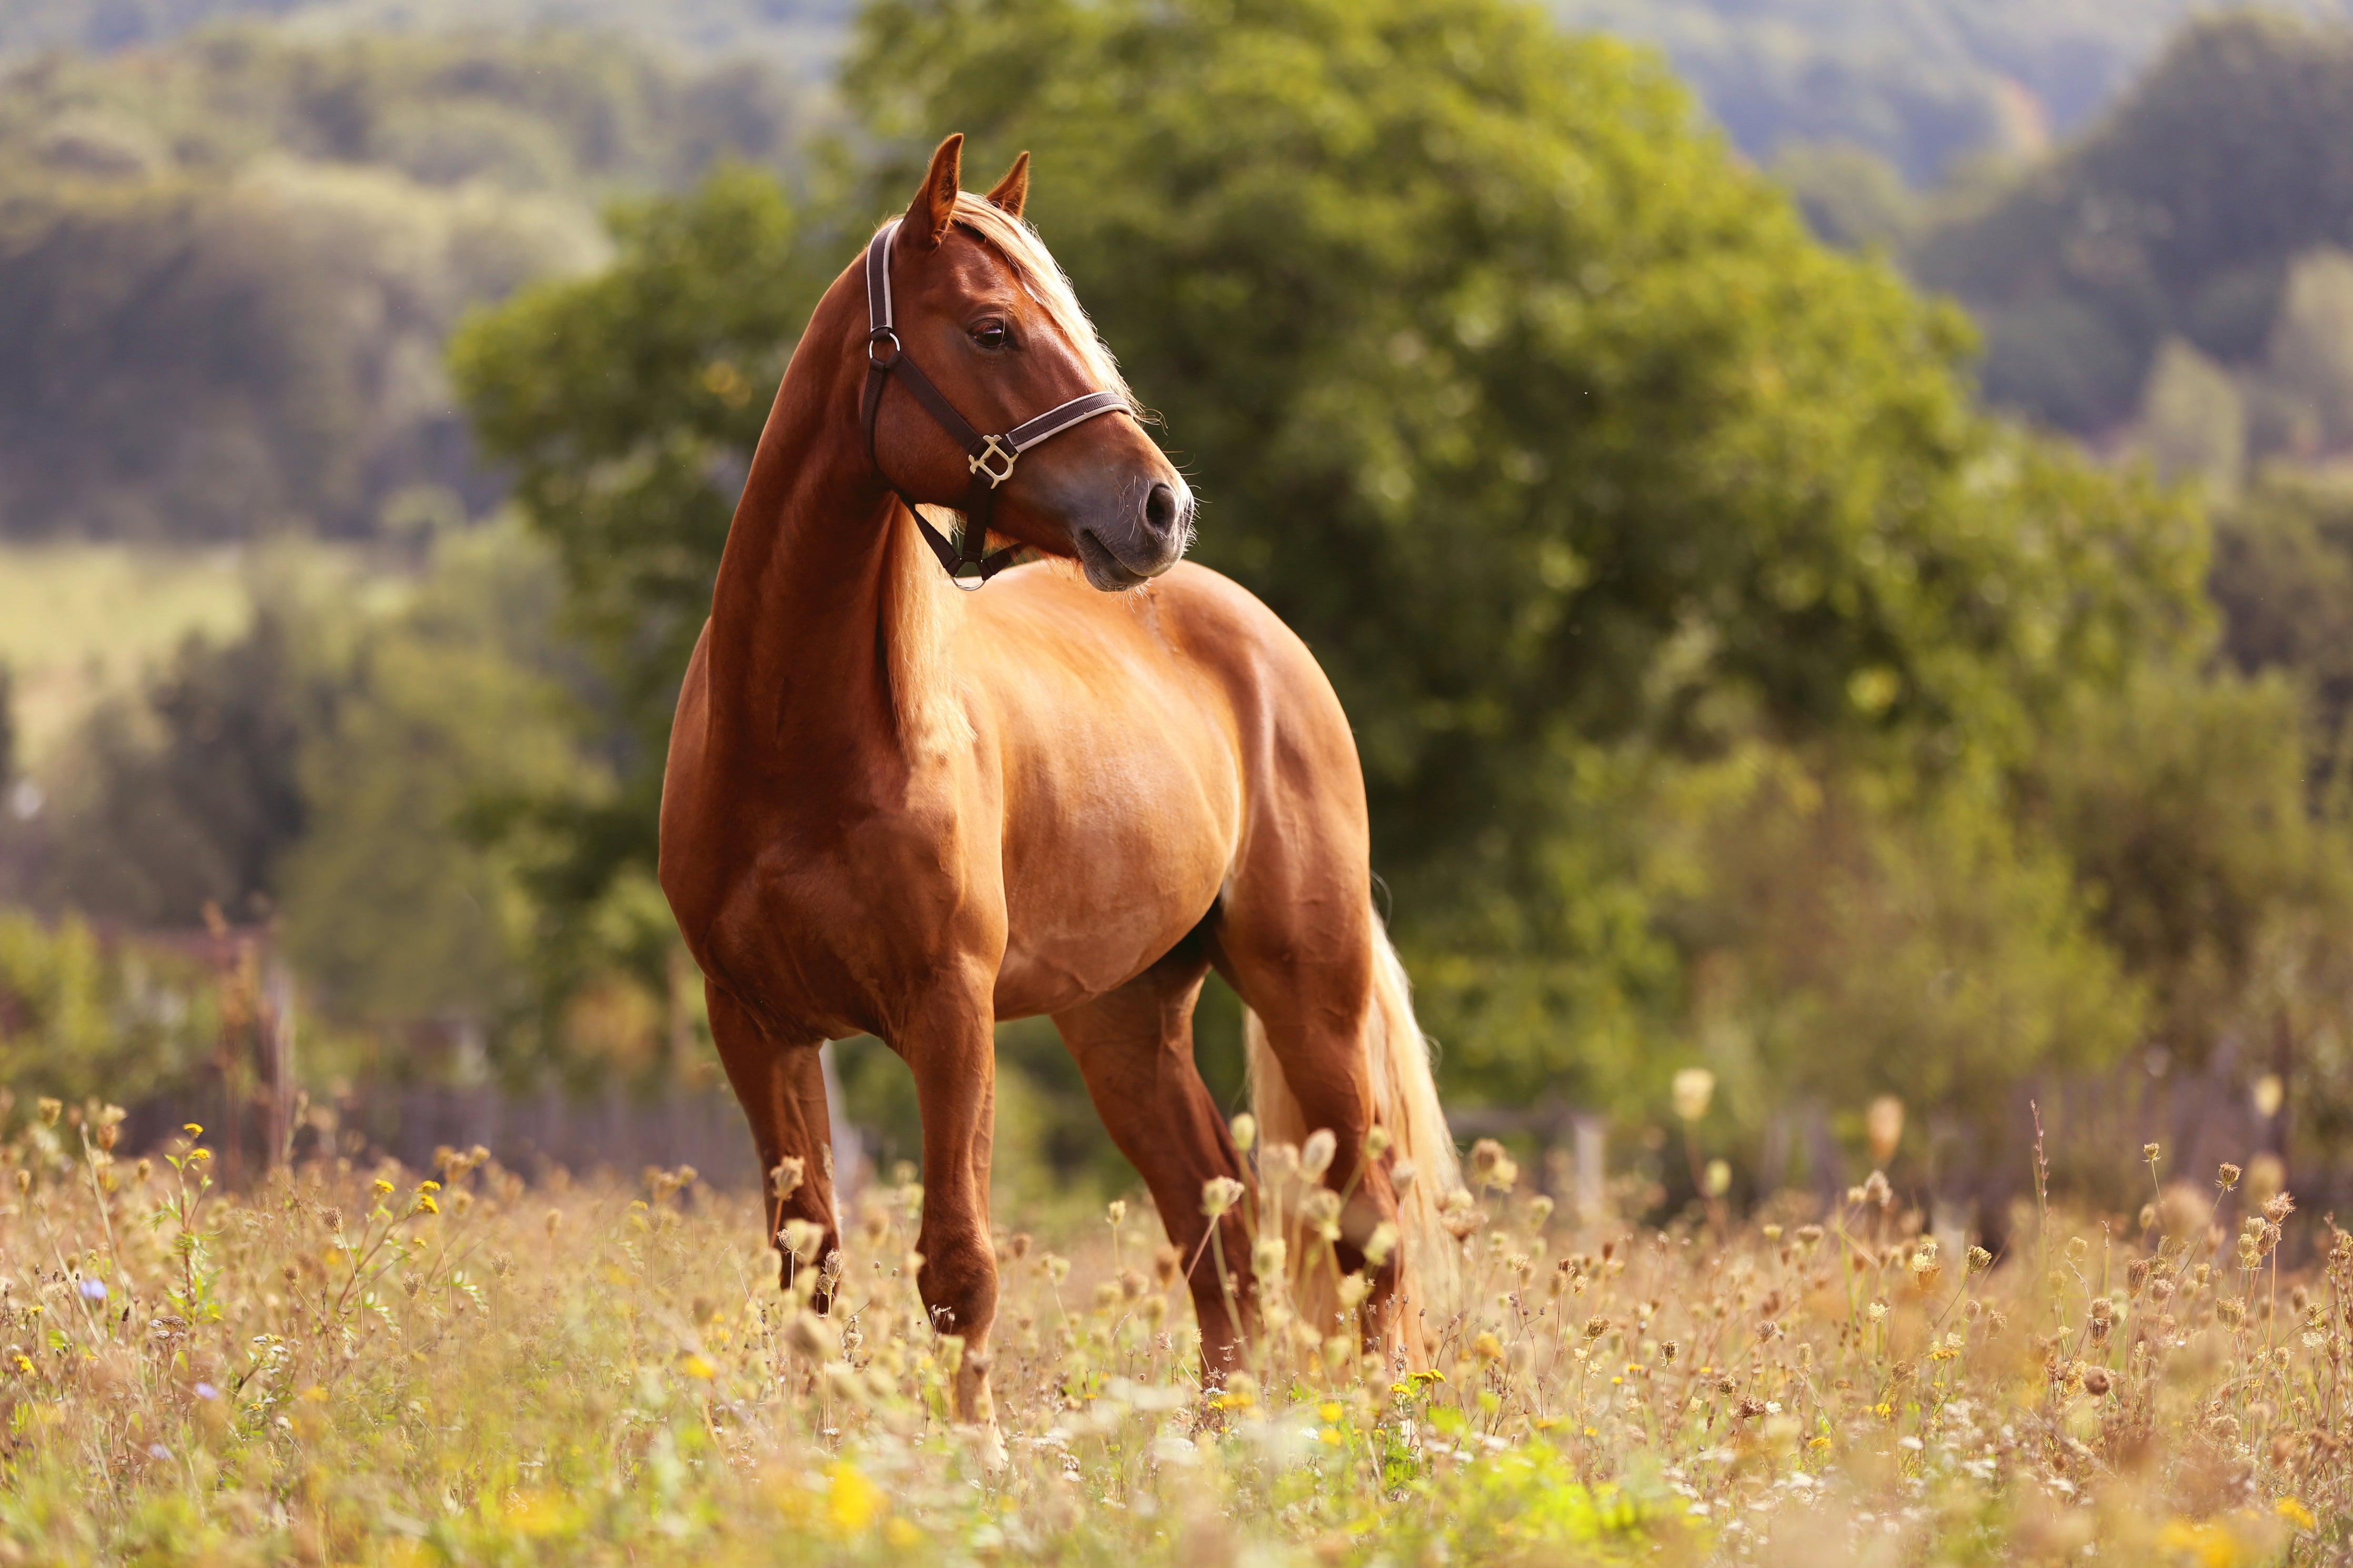 10 fun and interesting facts about horses